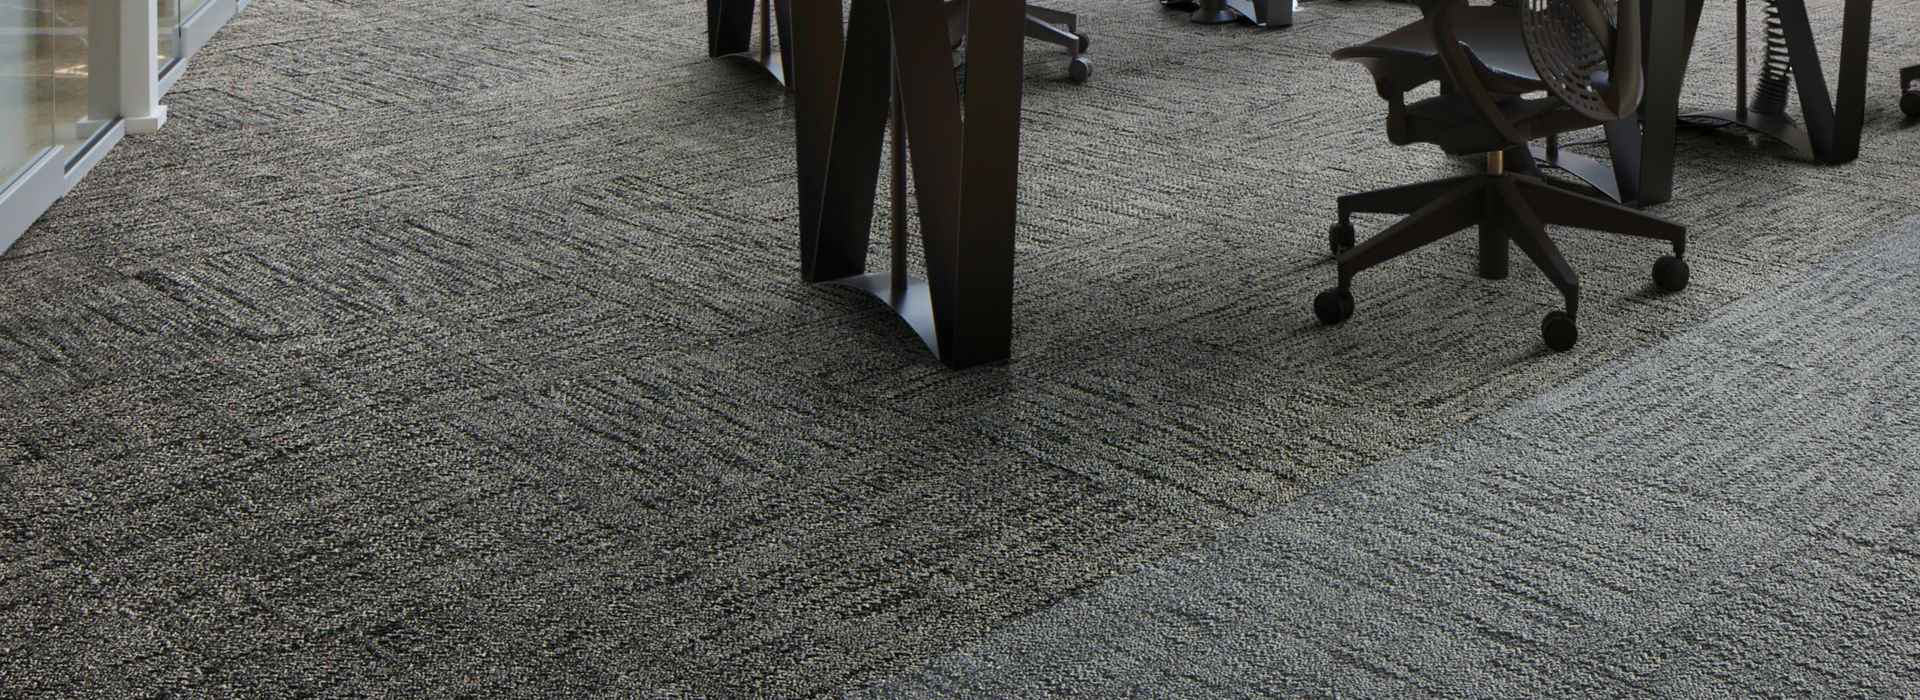 Interface Mirror Mirror carpet tile in open office space with tables and chairs